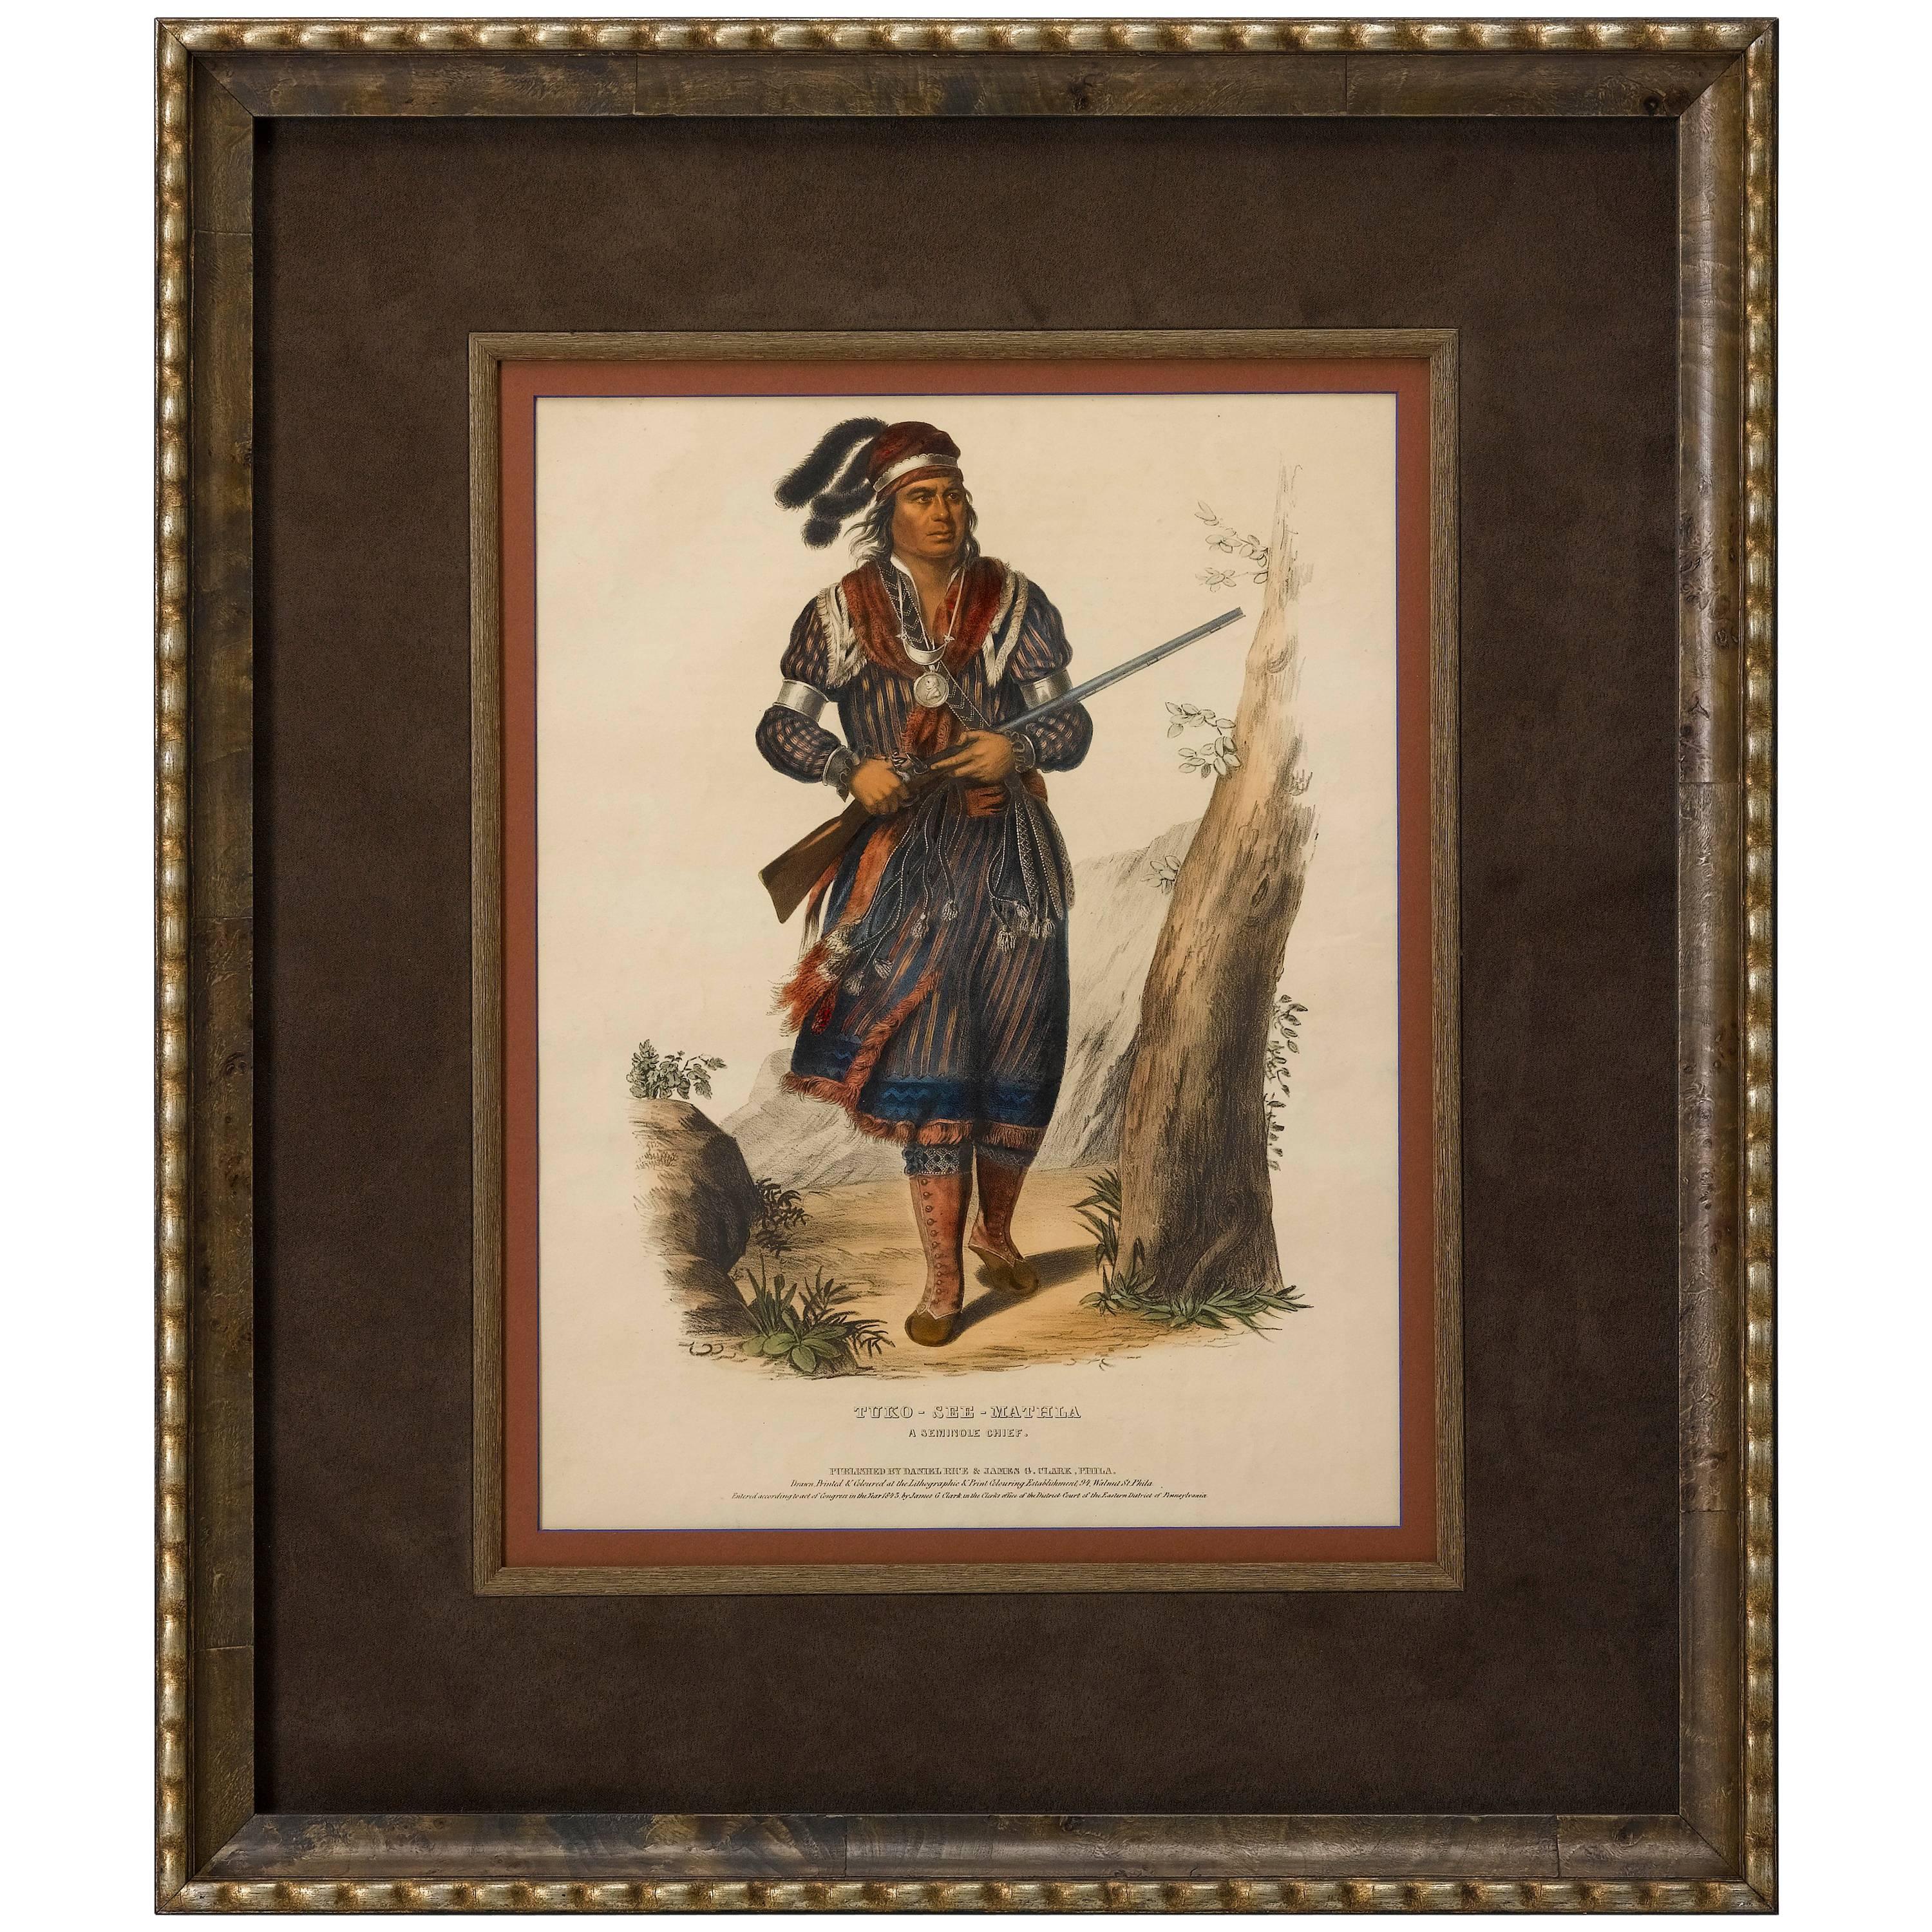 Tuko-See-Mathla, a Seminole Chief, Hand-Colored Litho by McKenney & Hall, 1836